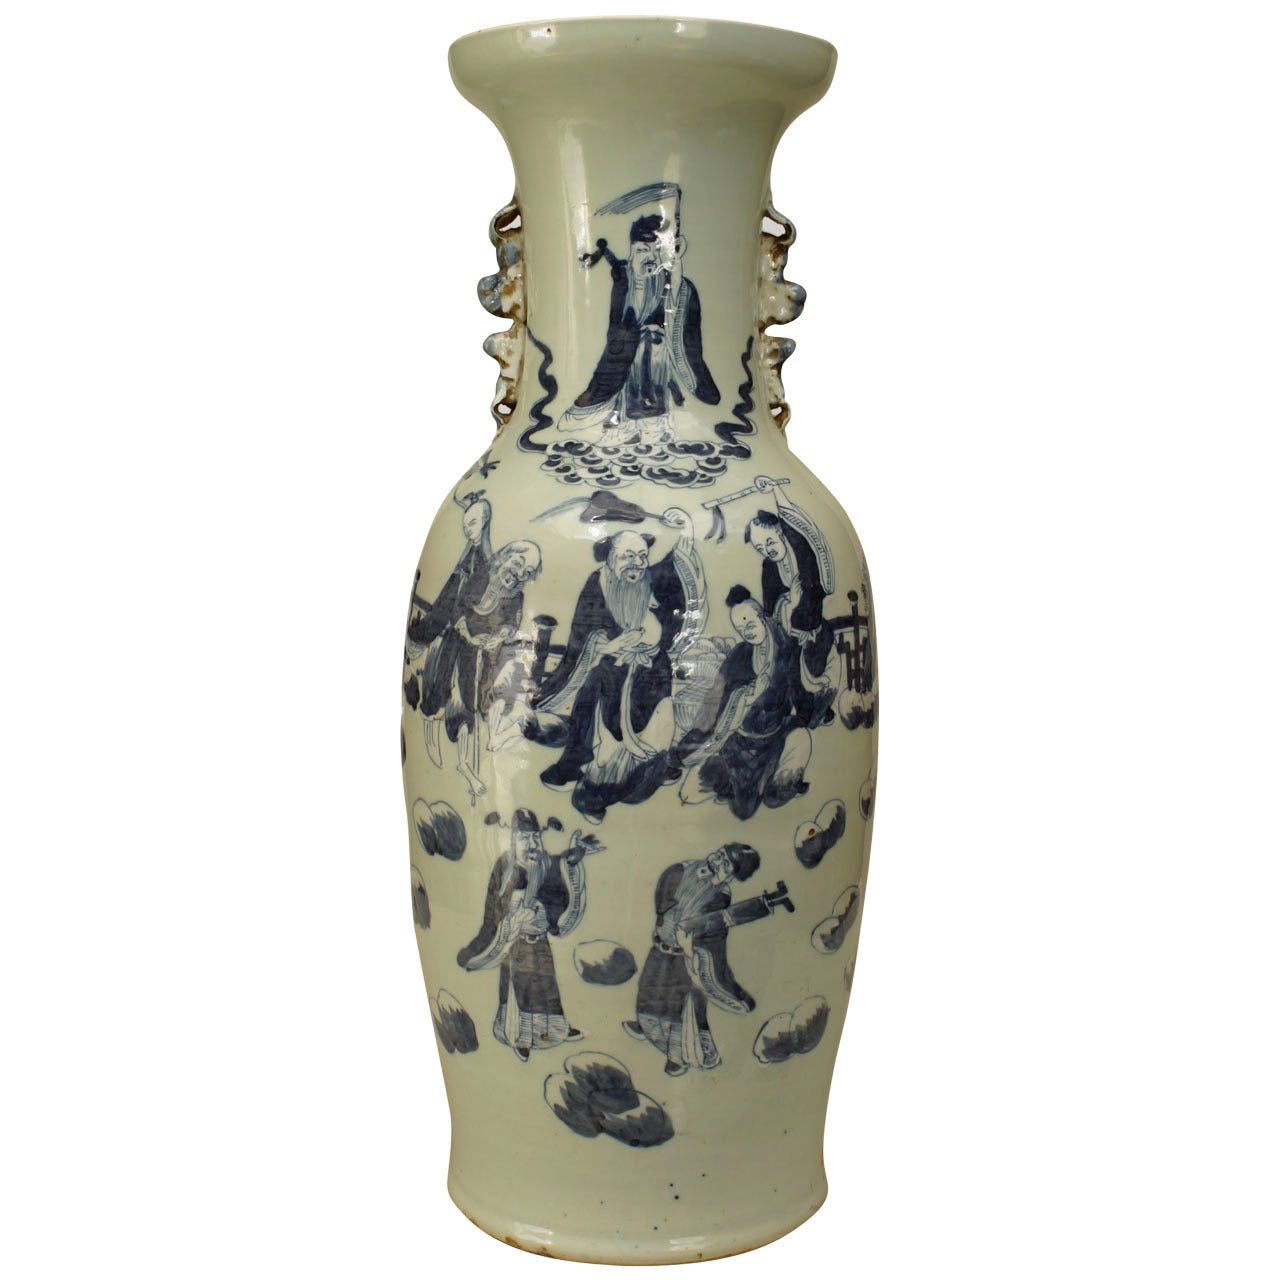 20th Century Chinese Celedon Porcelain Vase with Figural Decorations